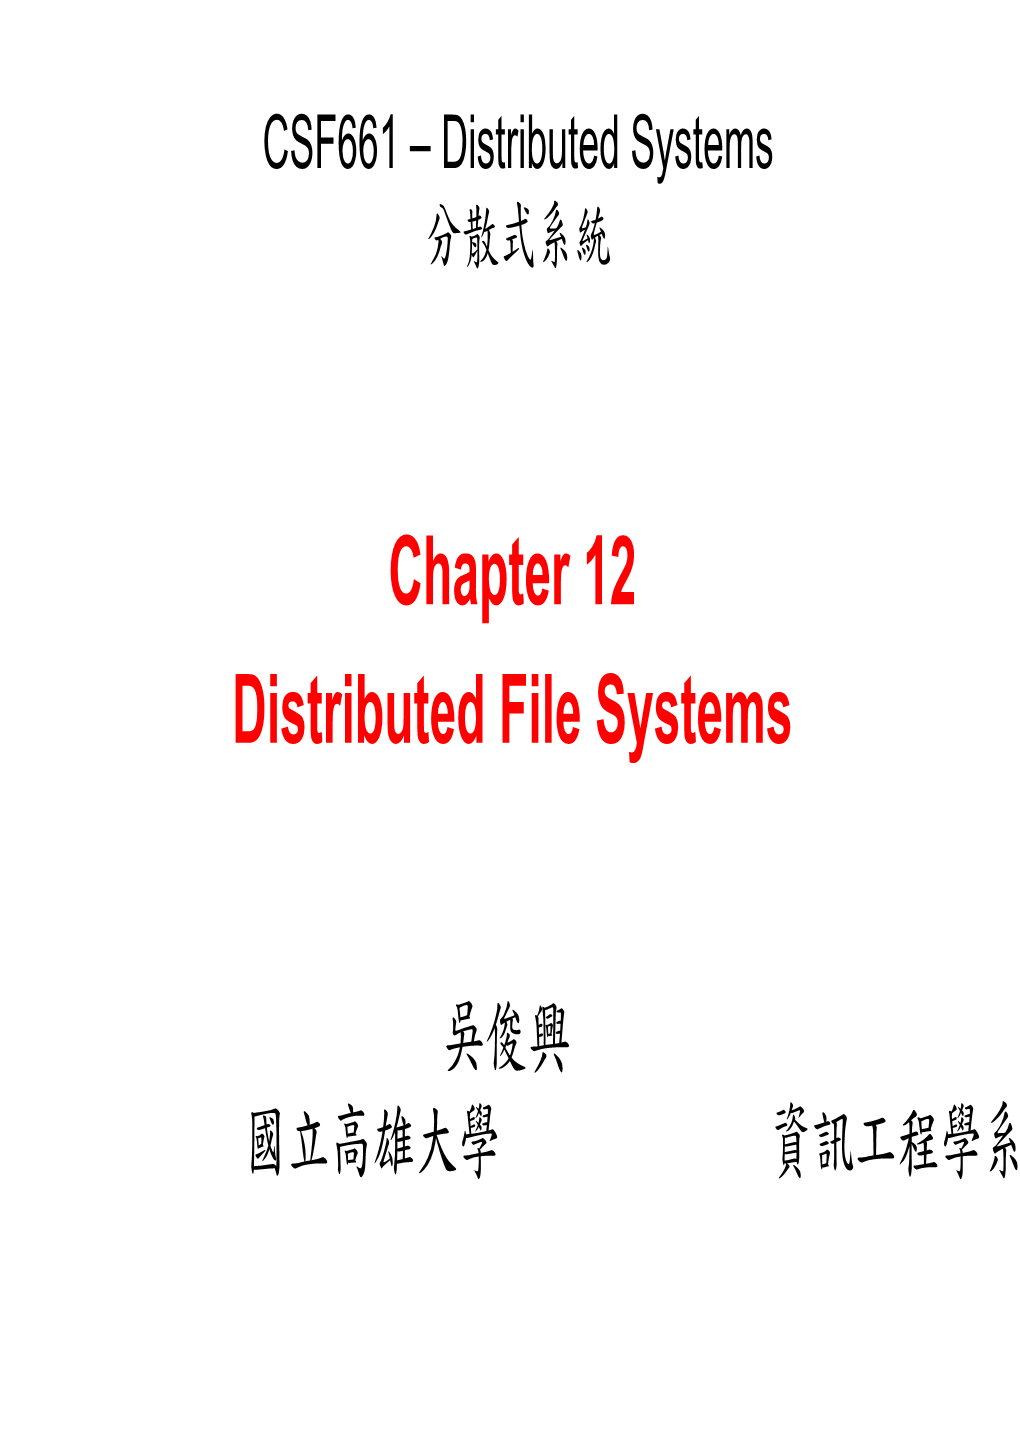 Chapter 12 Distributed File Systems